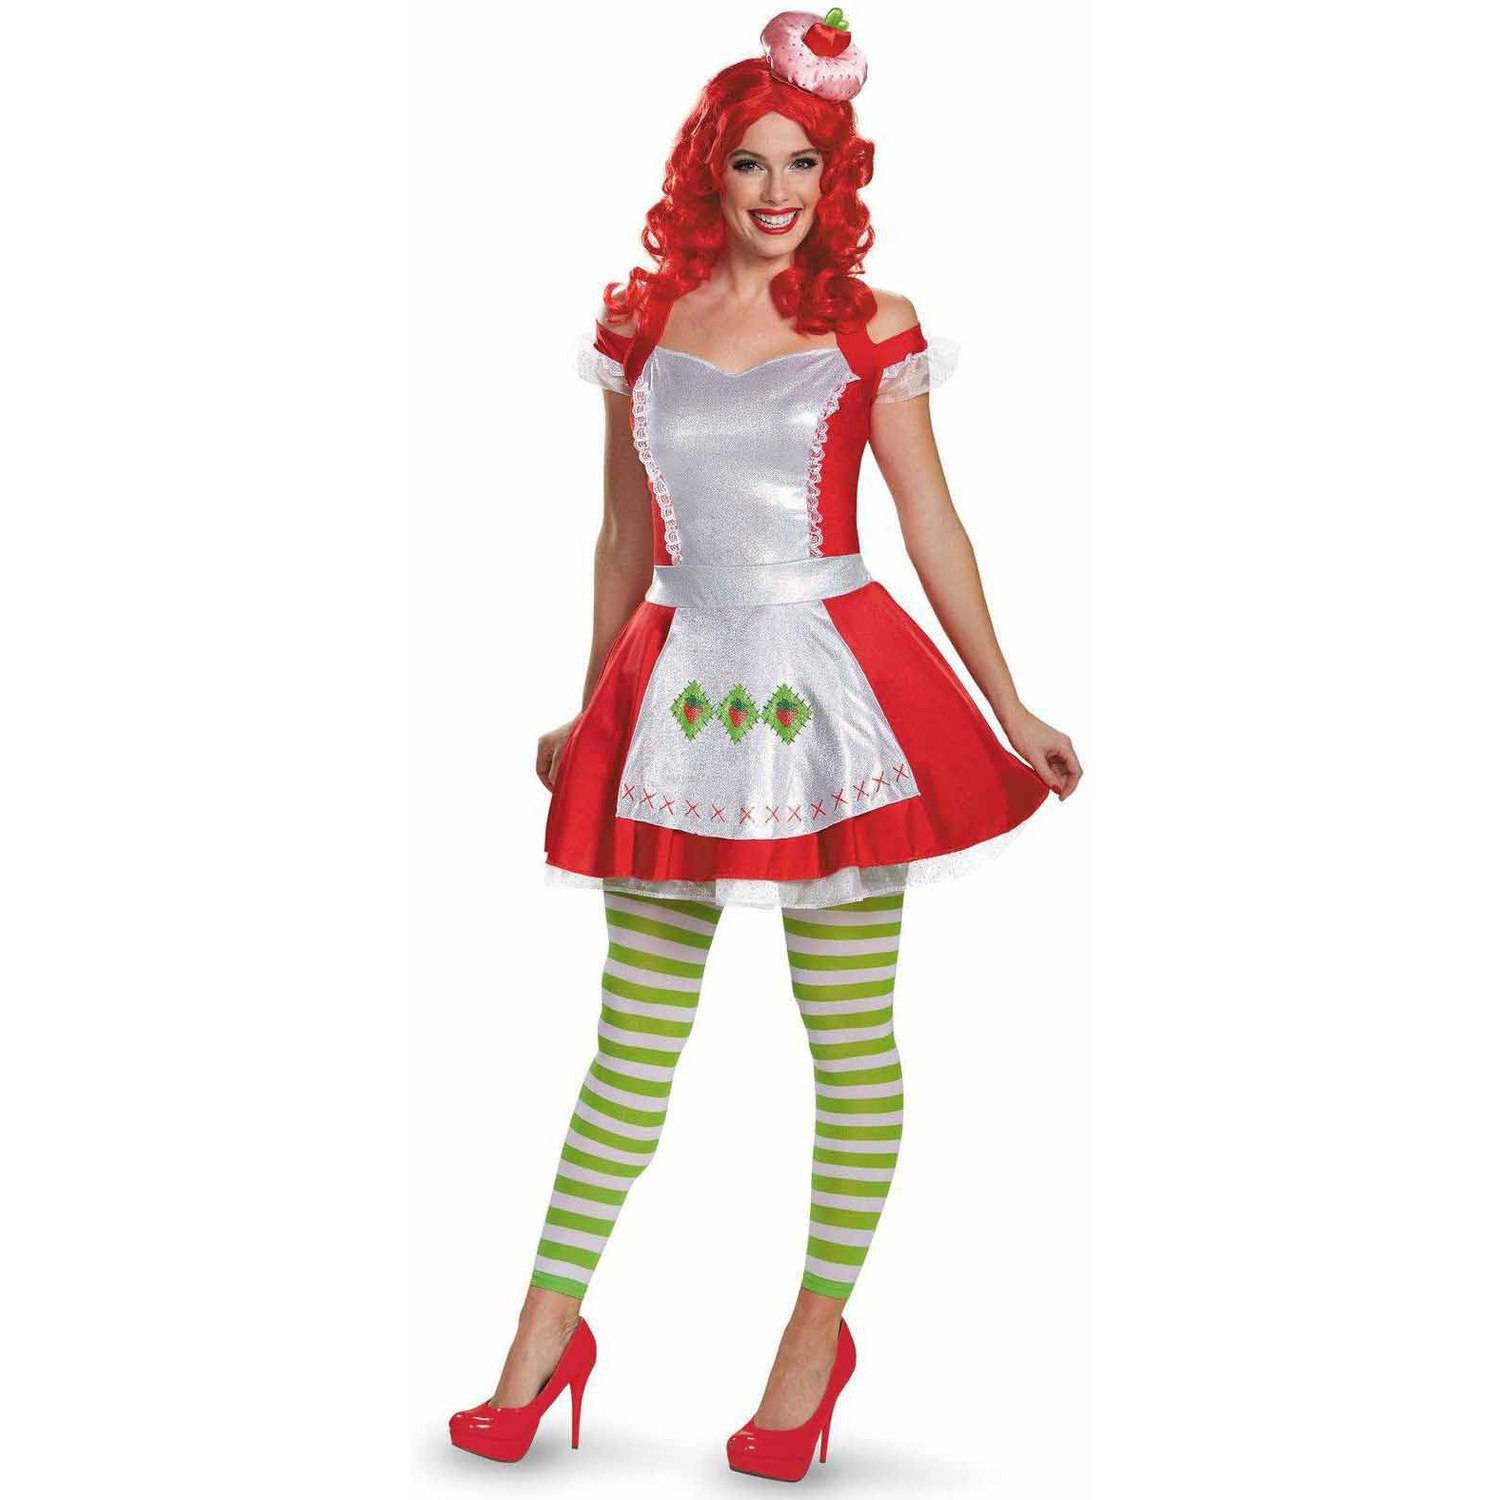 Strawberry shortcake costume for adults